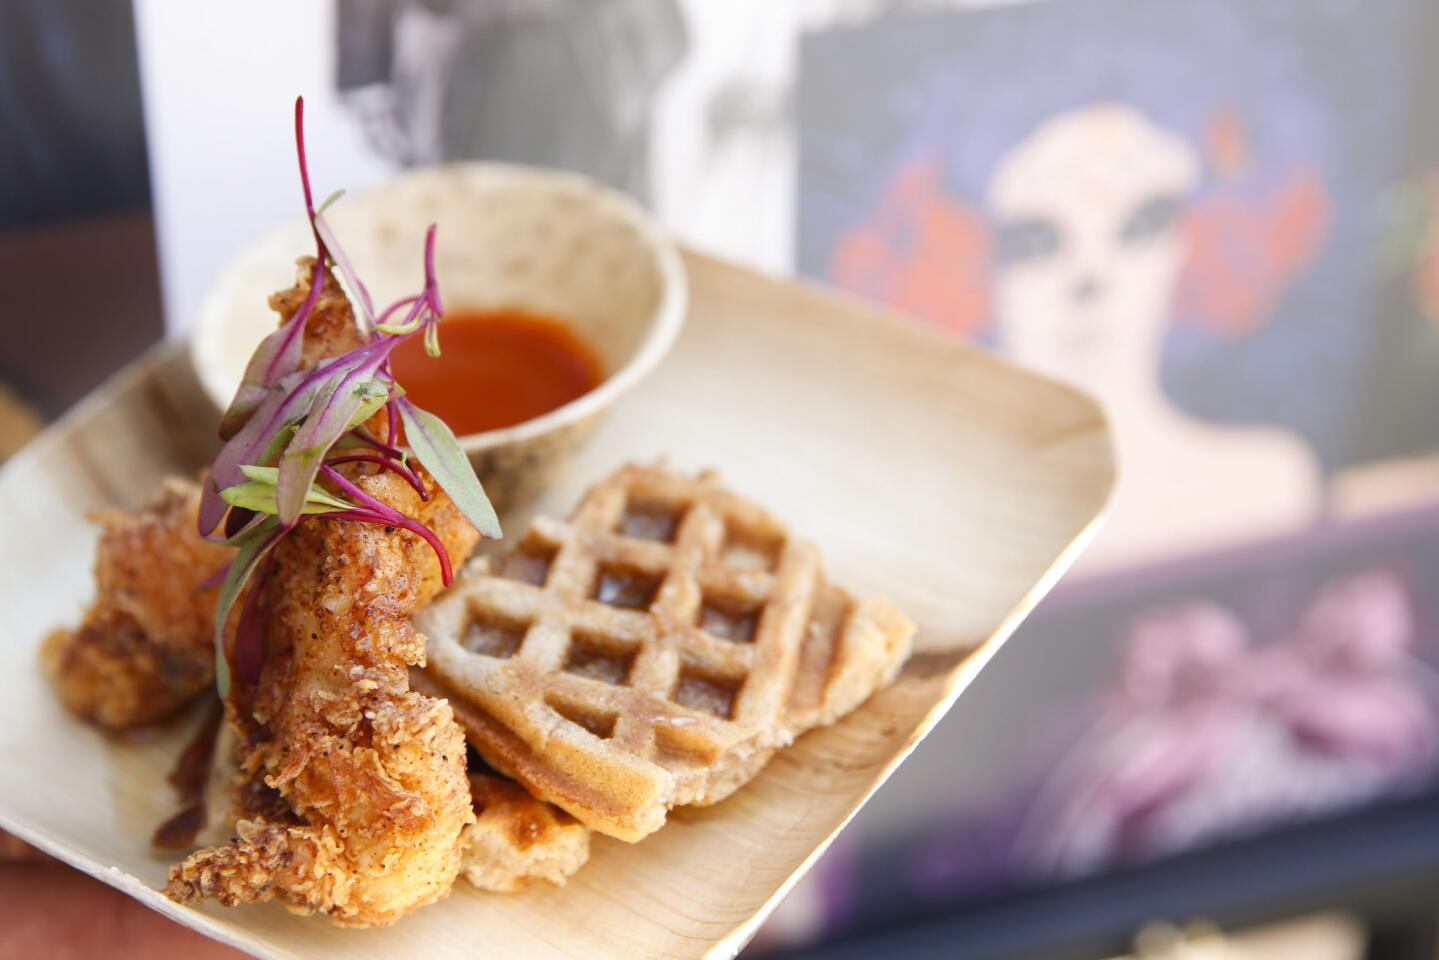 Chicken and Waffle from Toca Madera